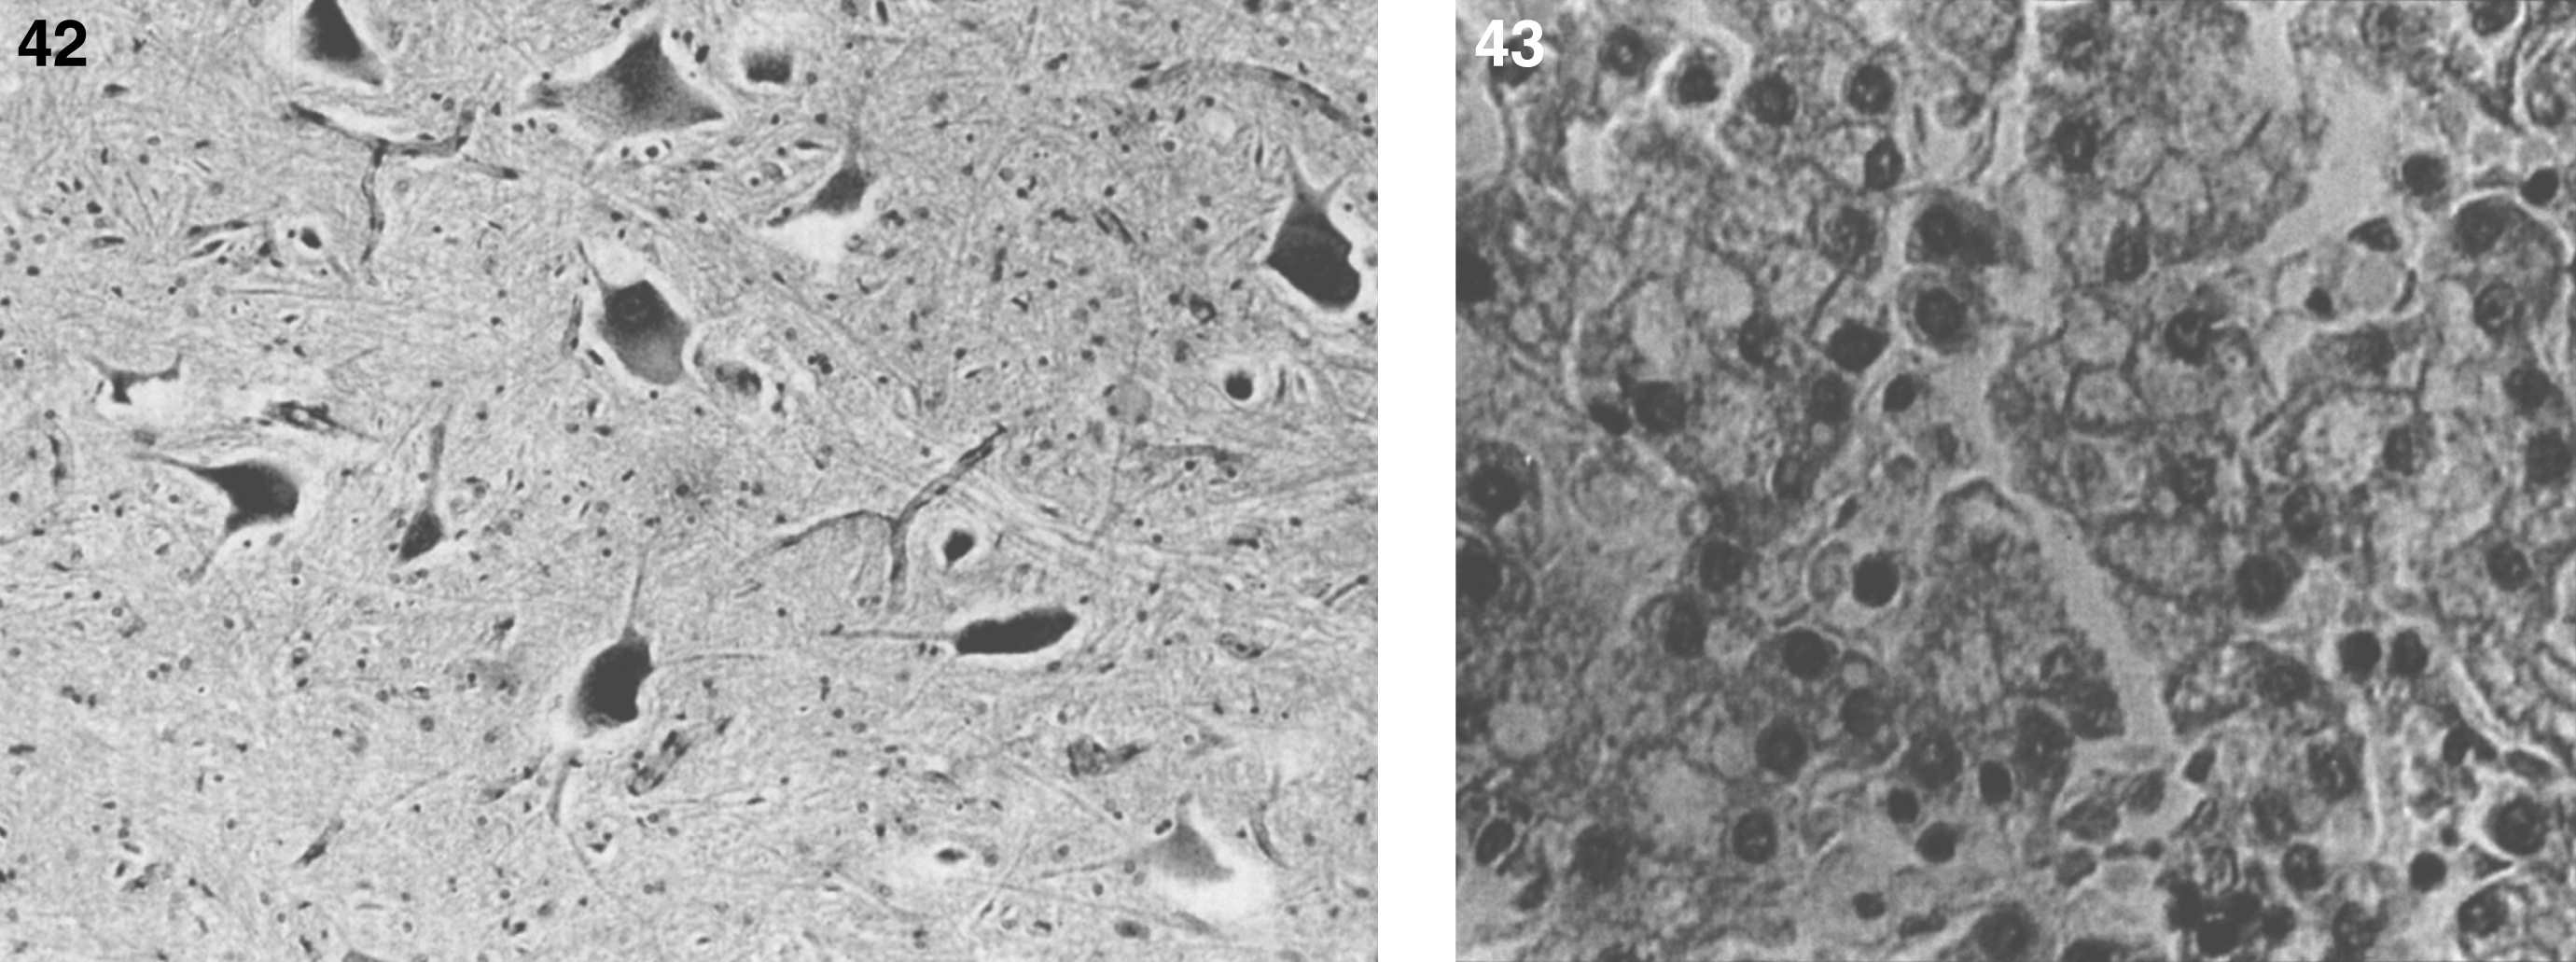 GM1 gangliosidosis type I: brain. The cortical neurons are distended with ganglioside; (43) GM1 gangliosidosis type I: liver. Some hepatocytes are swollen and contain storage material.